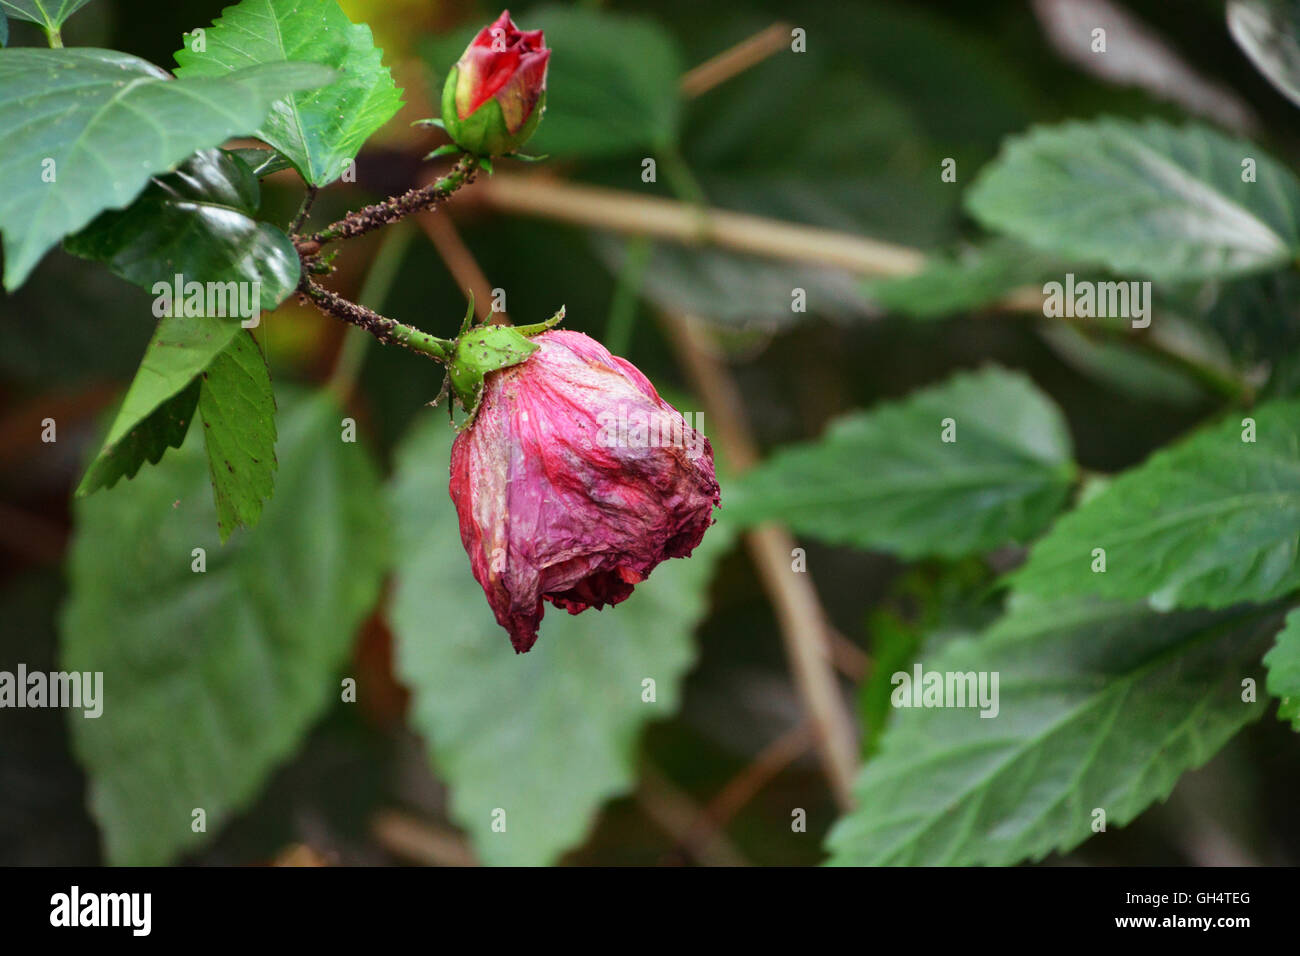 Wilting Rose with Budding Rose Stock Photo